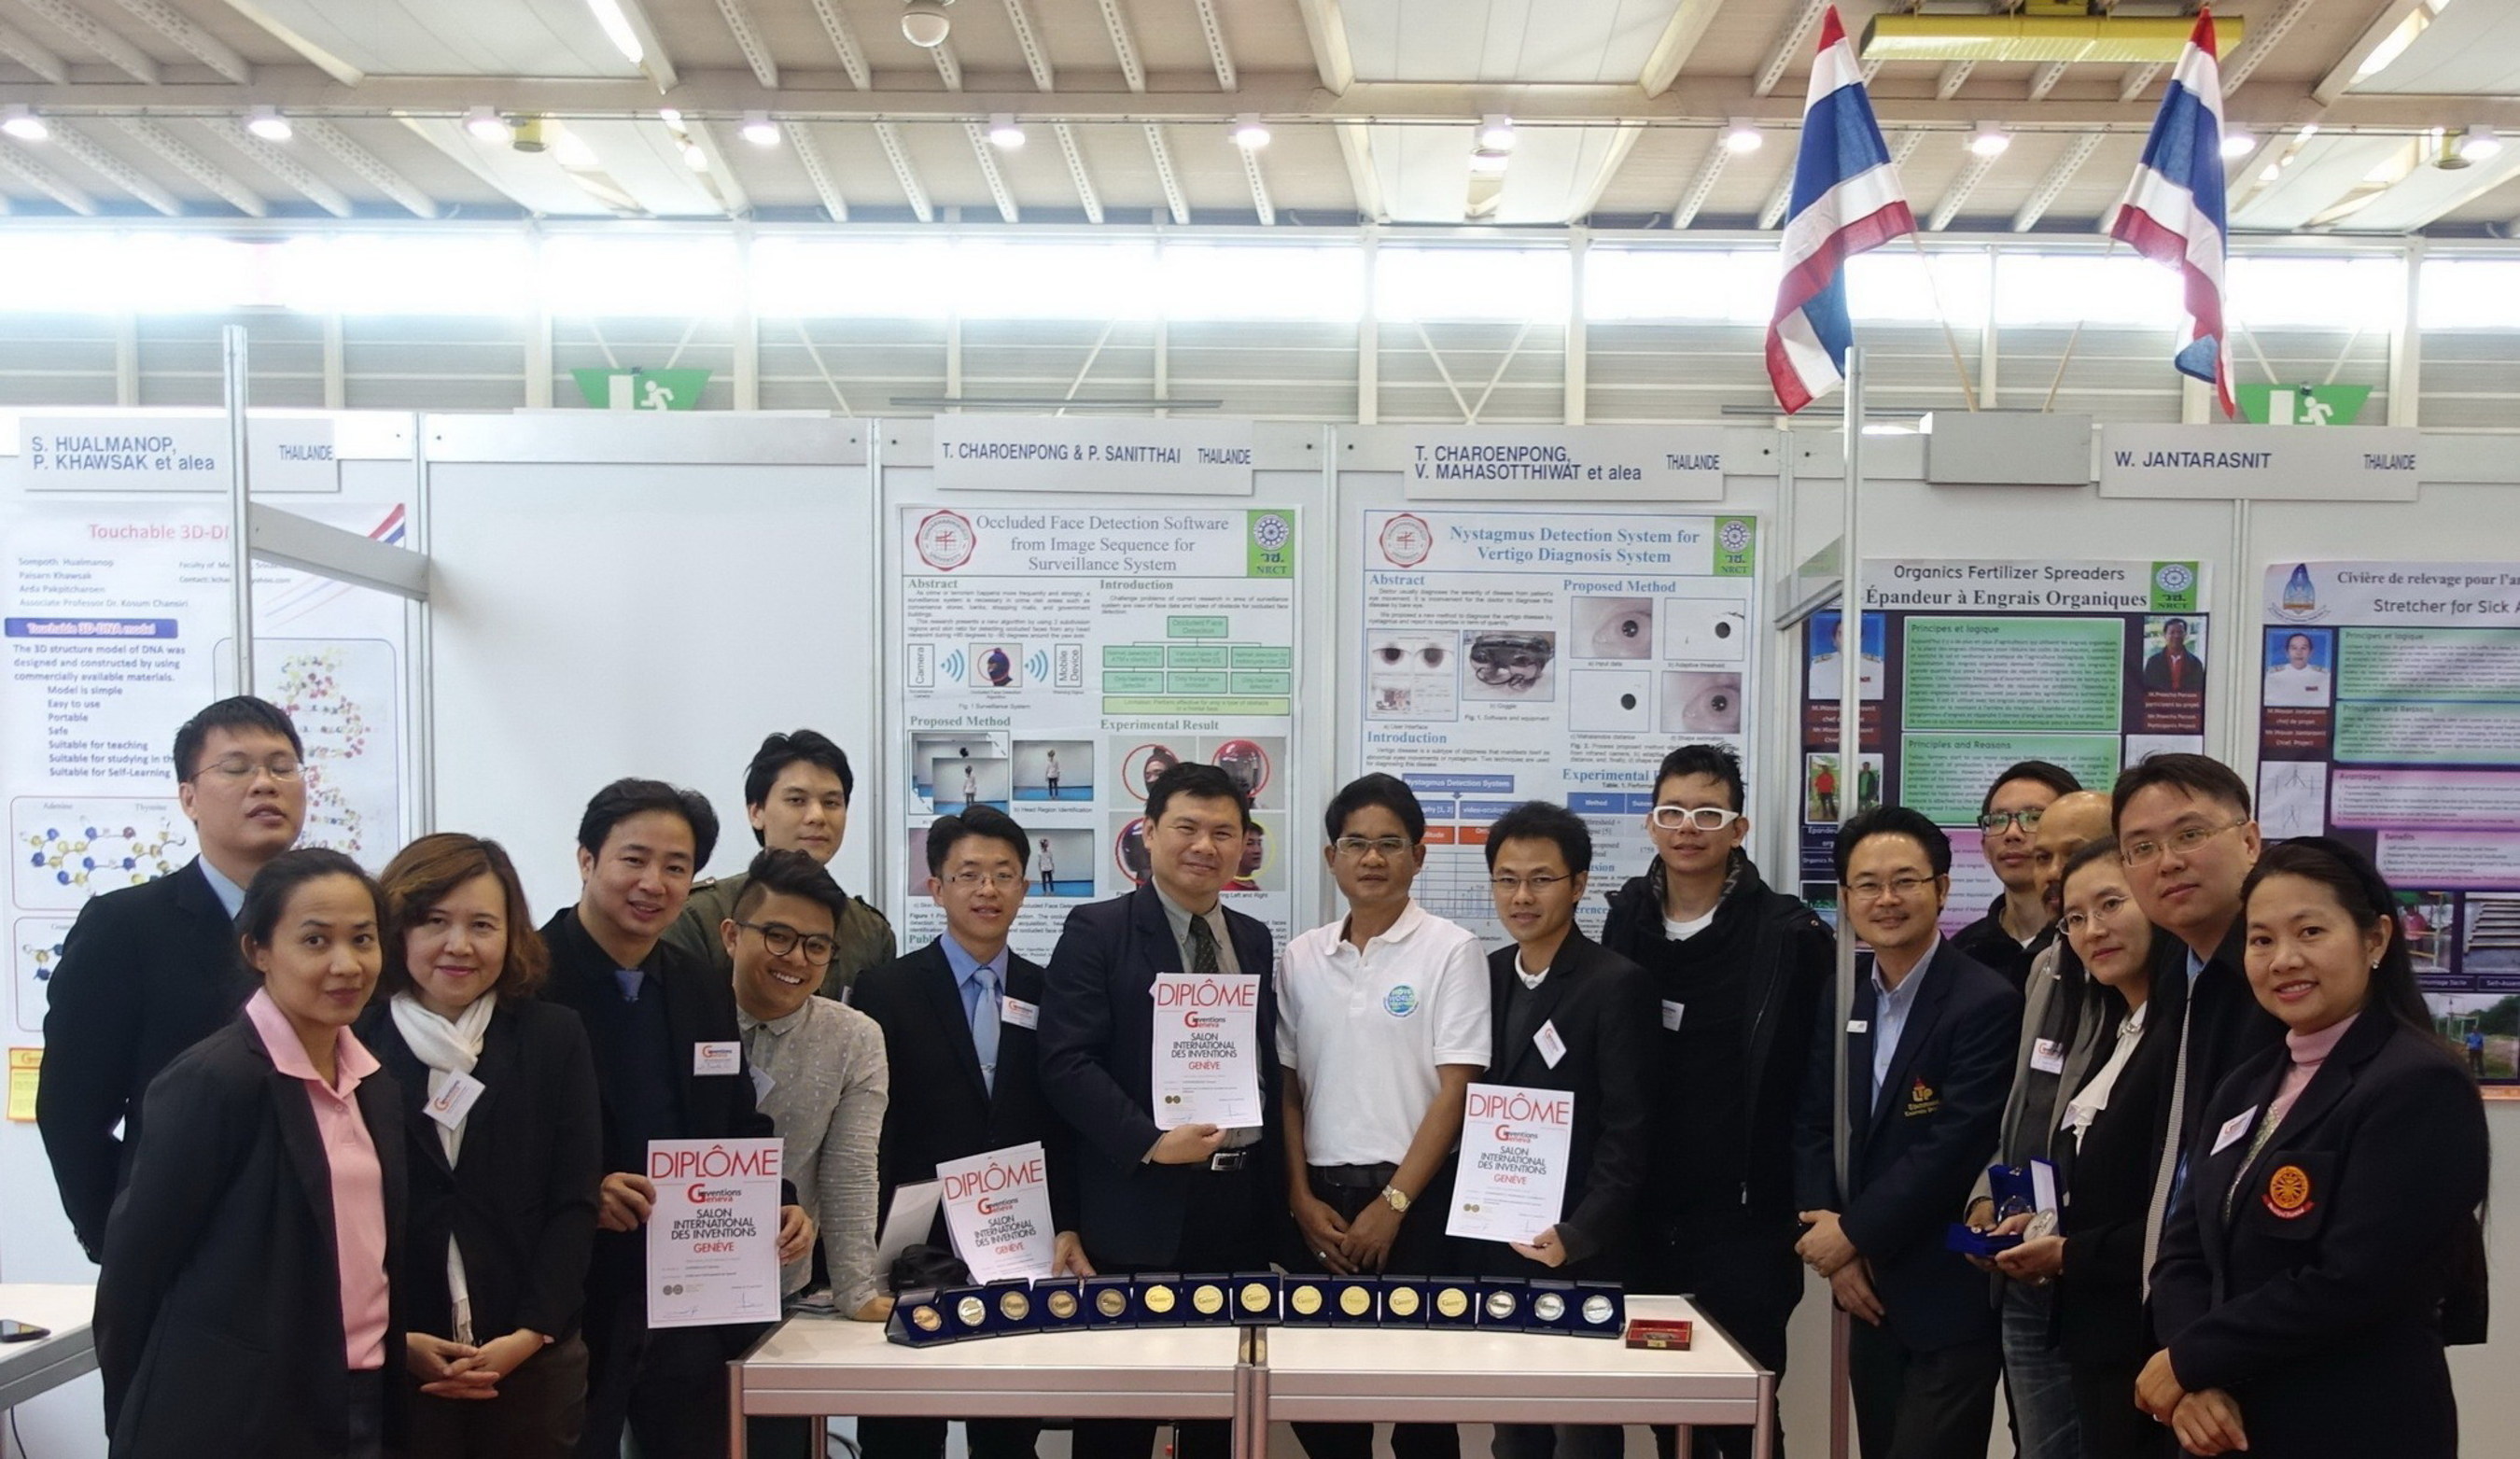 Thammasat teams put forth a very impressive showing at the 43rd International Exhibition of Inventions of Geneva